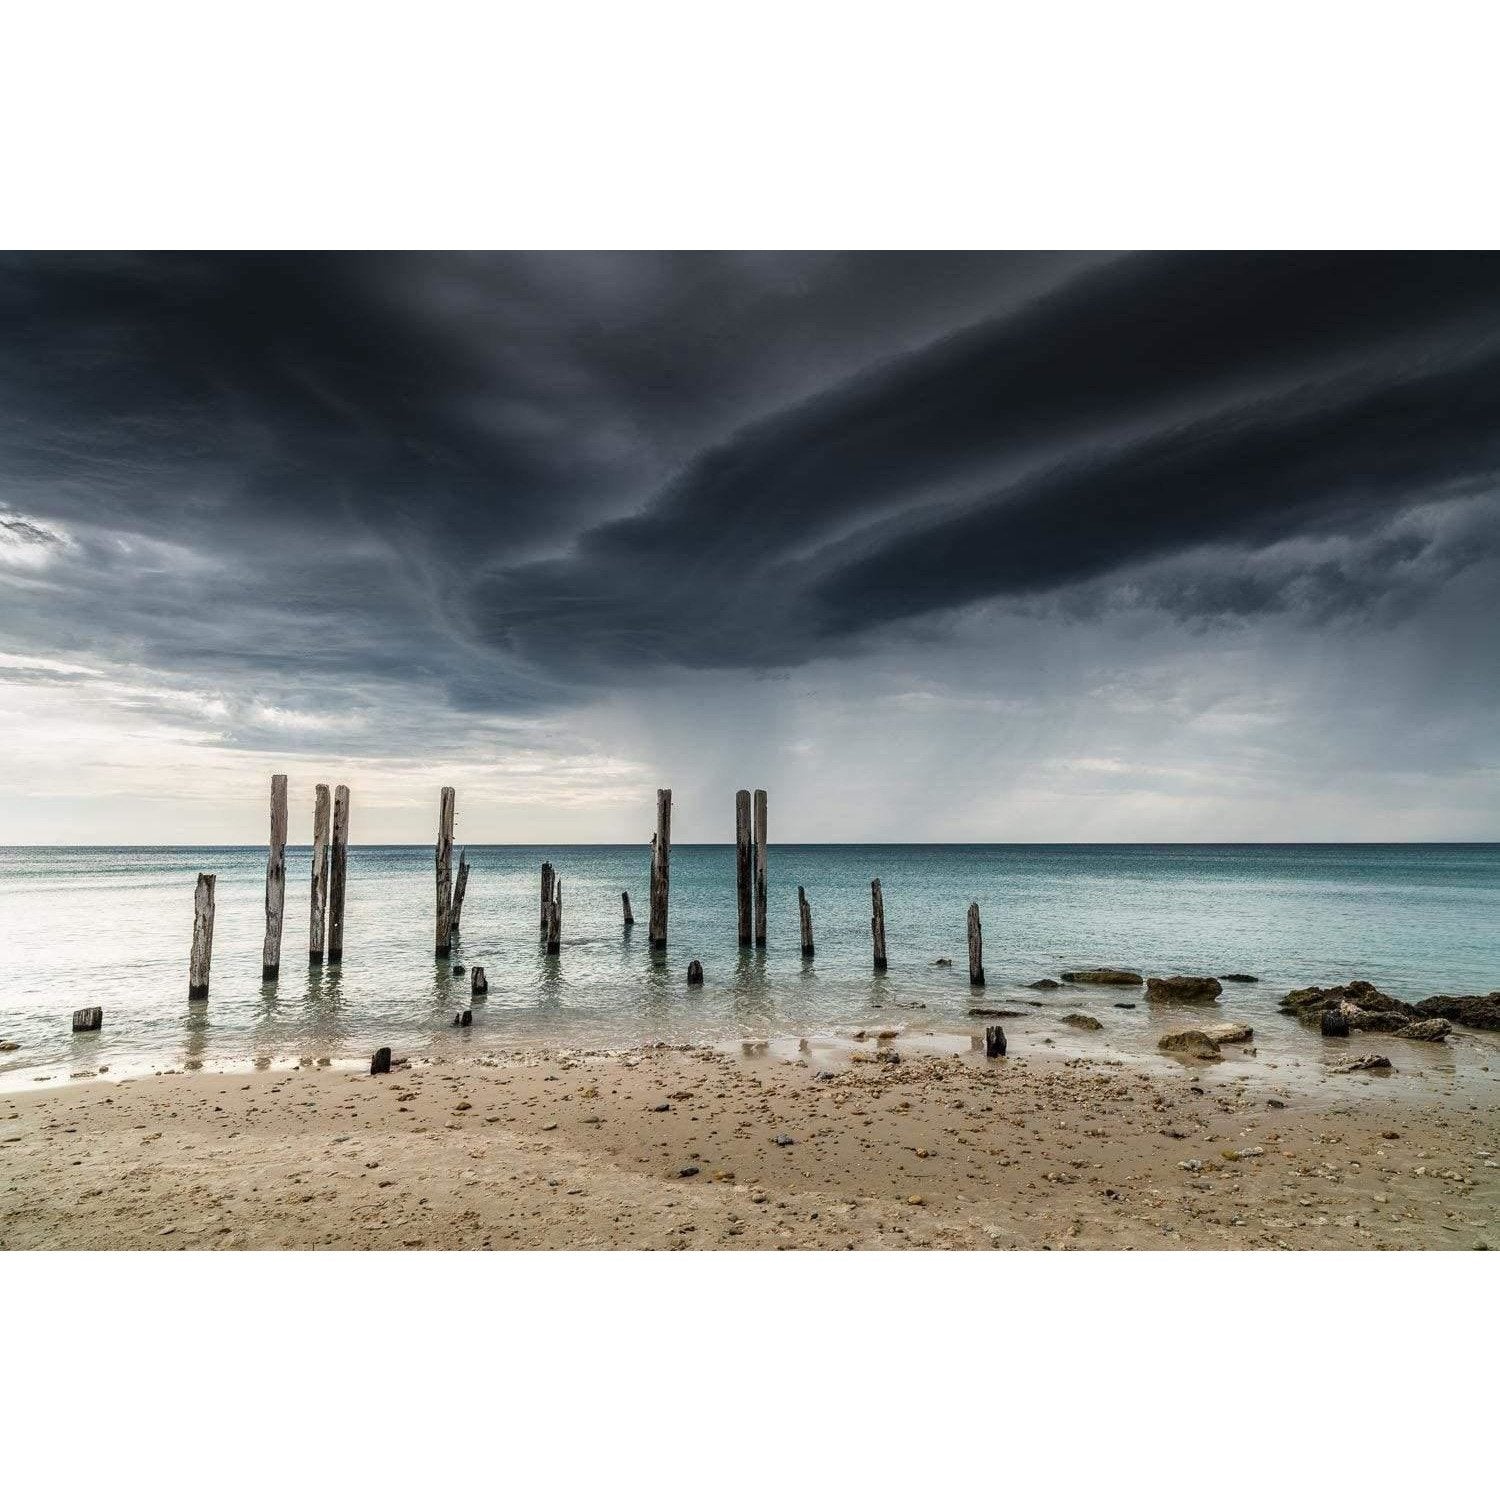 Wood pillars standing tall penetrating in the ground underwater, and the stormy black clouds are ready to fall, Armageddon, Willunga SA Artwork 